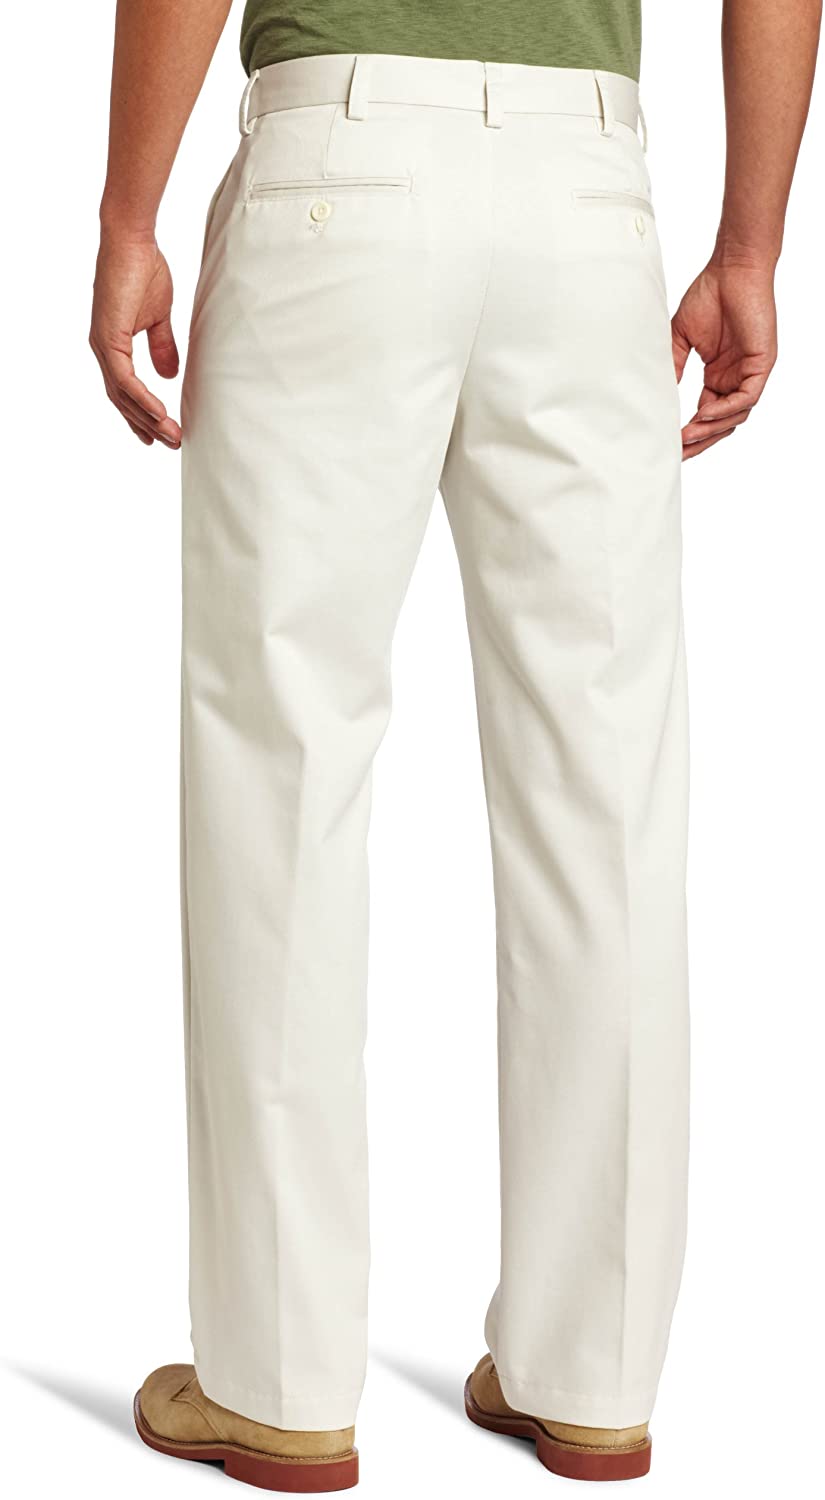 IZOD Men's American Chino Flat Front Straight Fit Pant, Pumice, Size ...